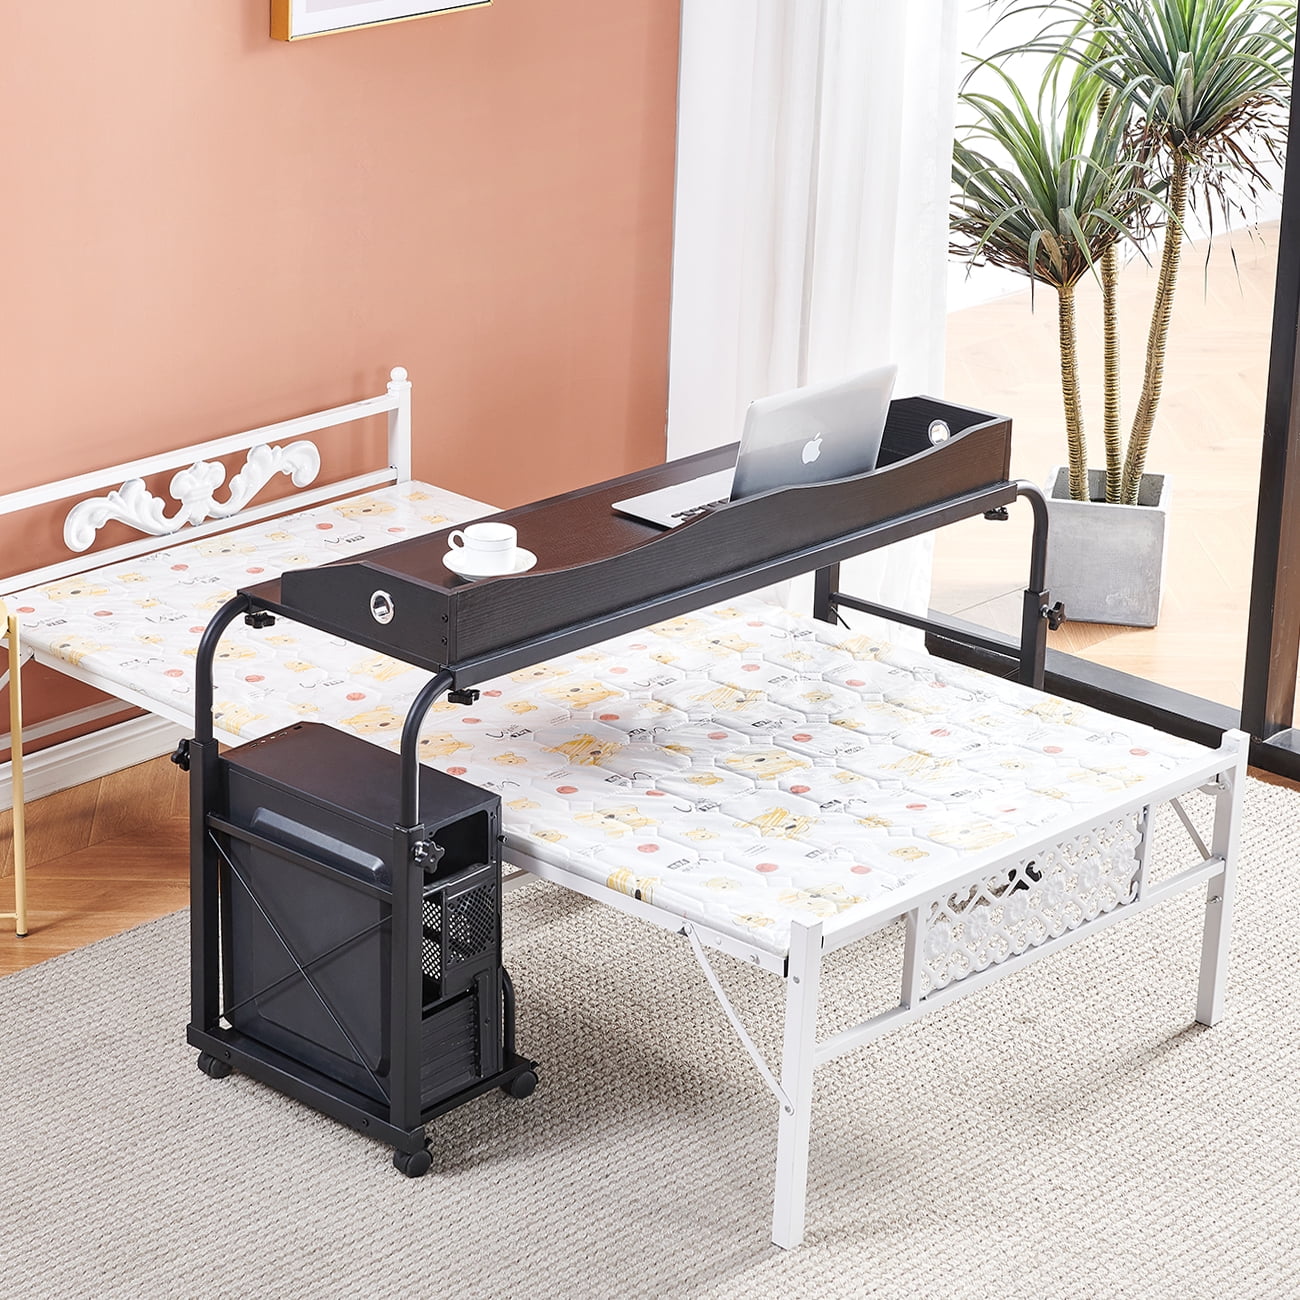 Coffee Huisenus Adjustable Bed Table with Wheels Medical Overbed Table Movable Bed Table Rolling Home Office Desk with Keyboard Drawer Width Up to 78.7 for Twin/Twin XL/Full/Queen/California King 